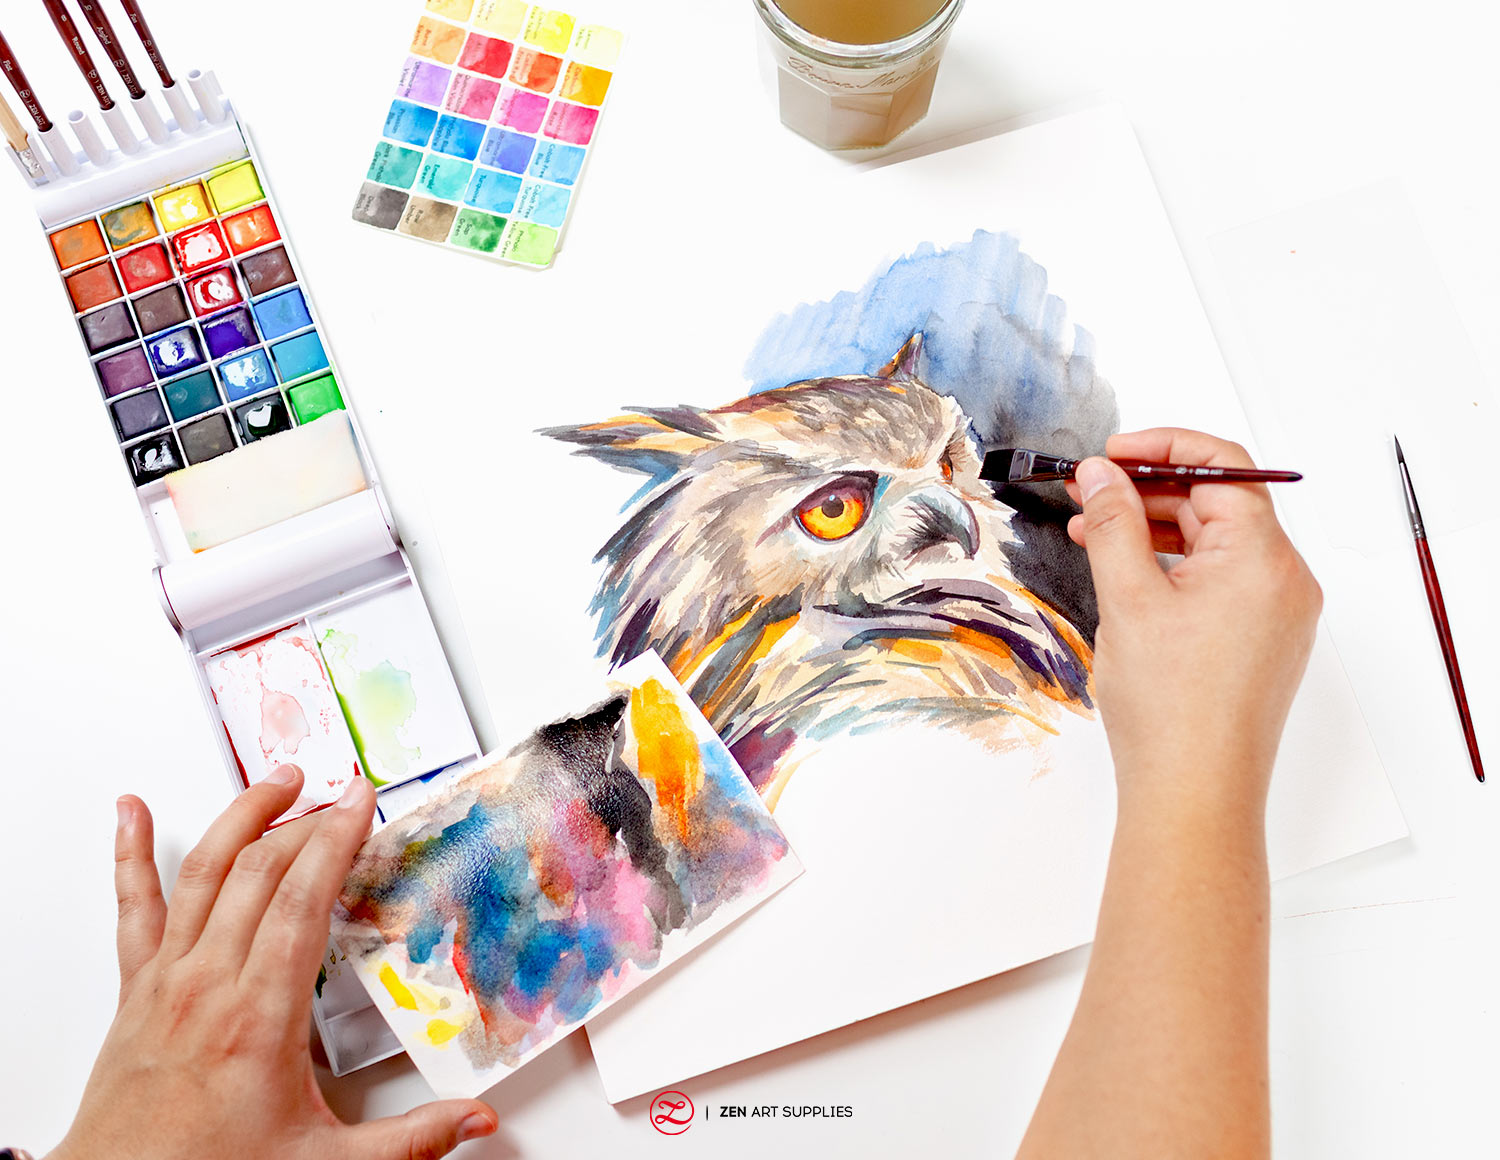 Eagle watercolor being painted on a watercolor block using a travel paint set.